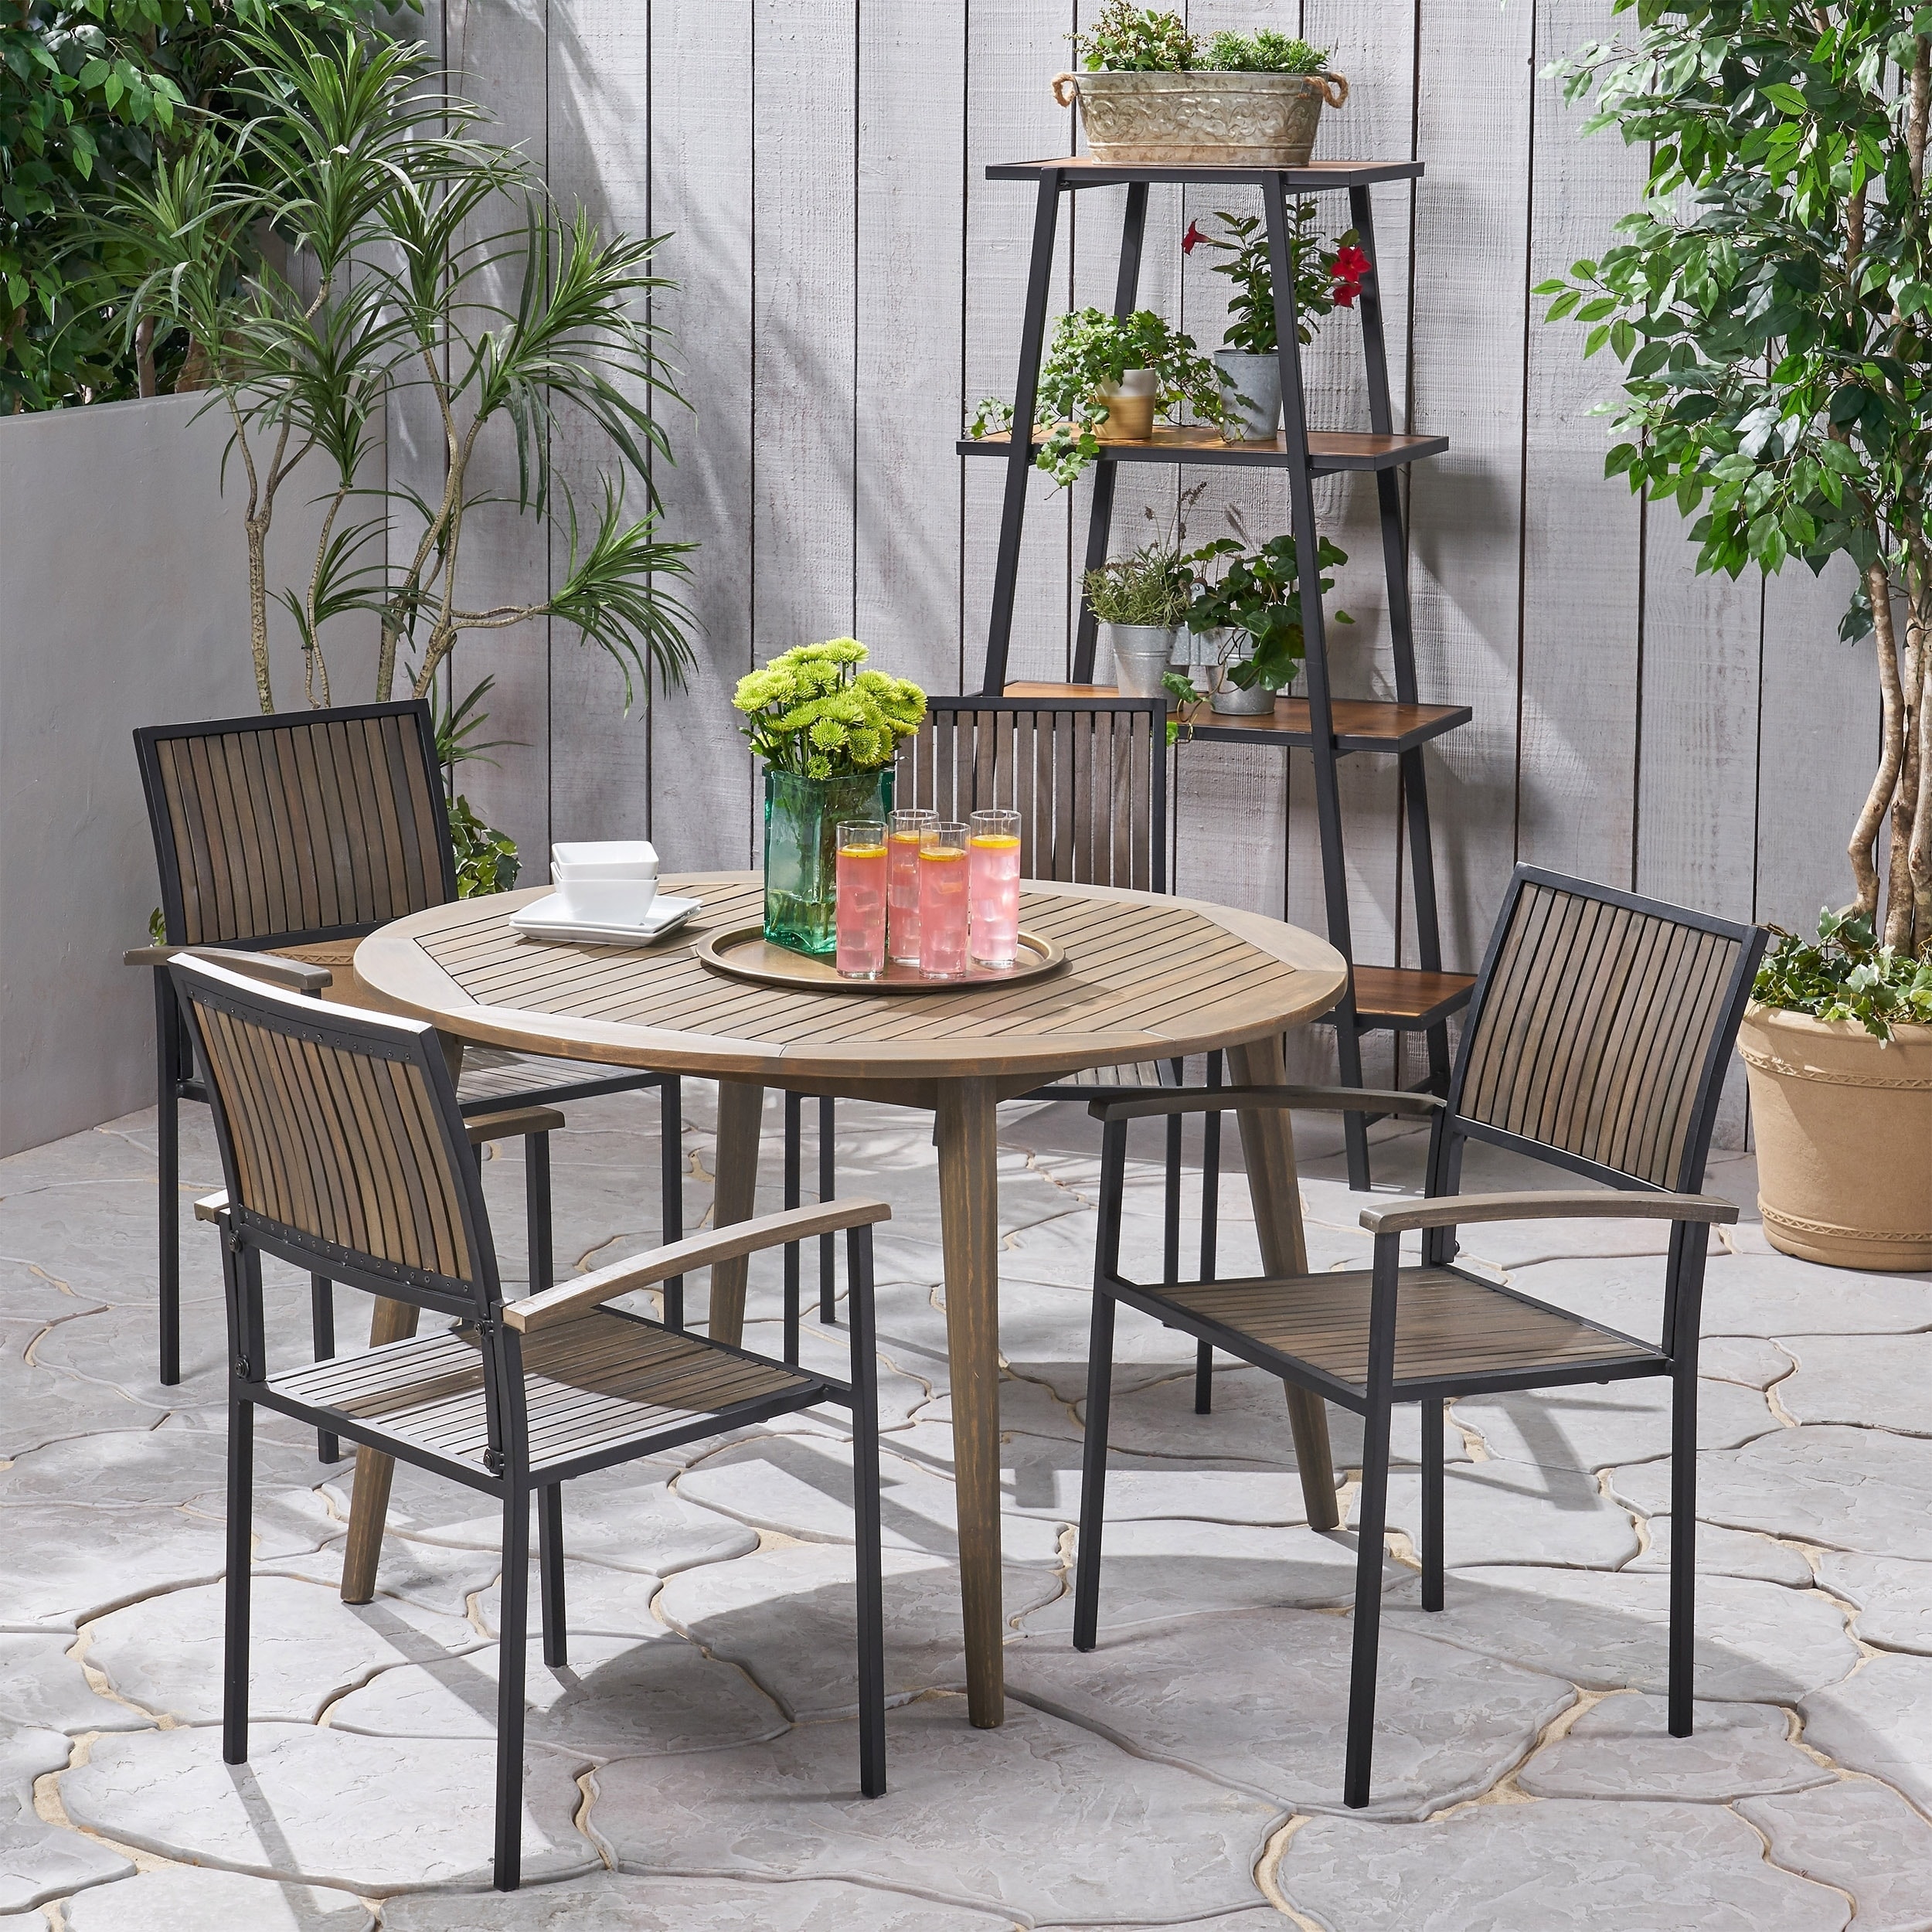 Alhaven Outdoor 4 Seater Acacia Wood Circular Dining Set By Christopher Knight Home